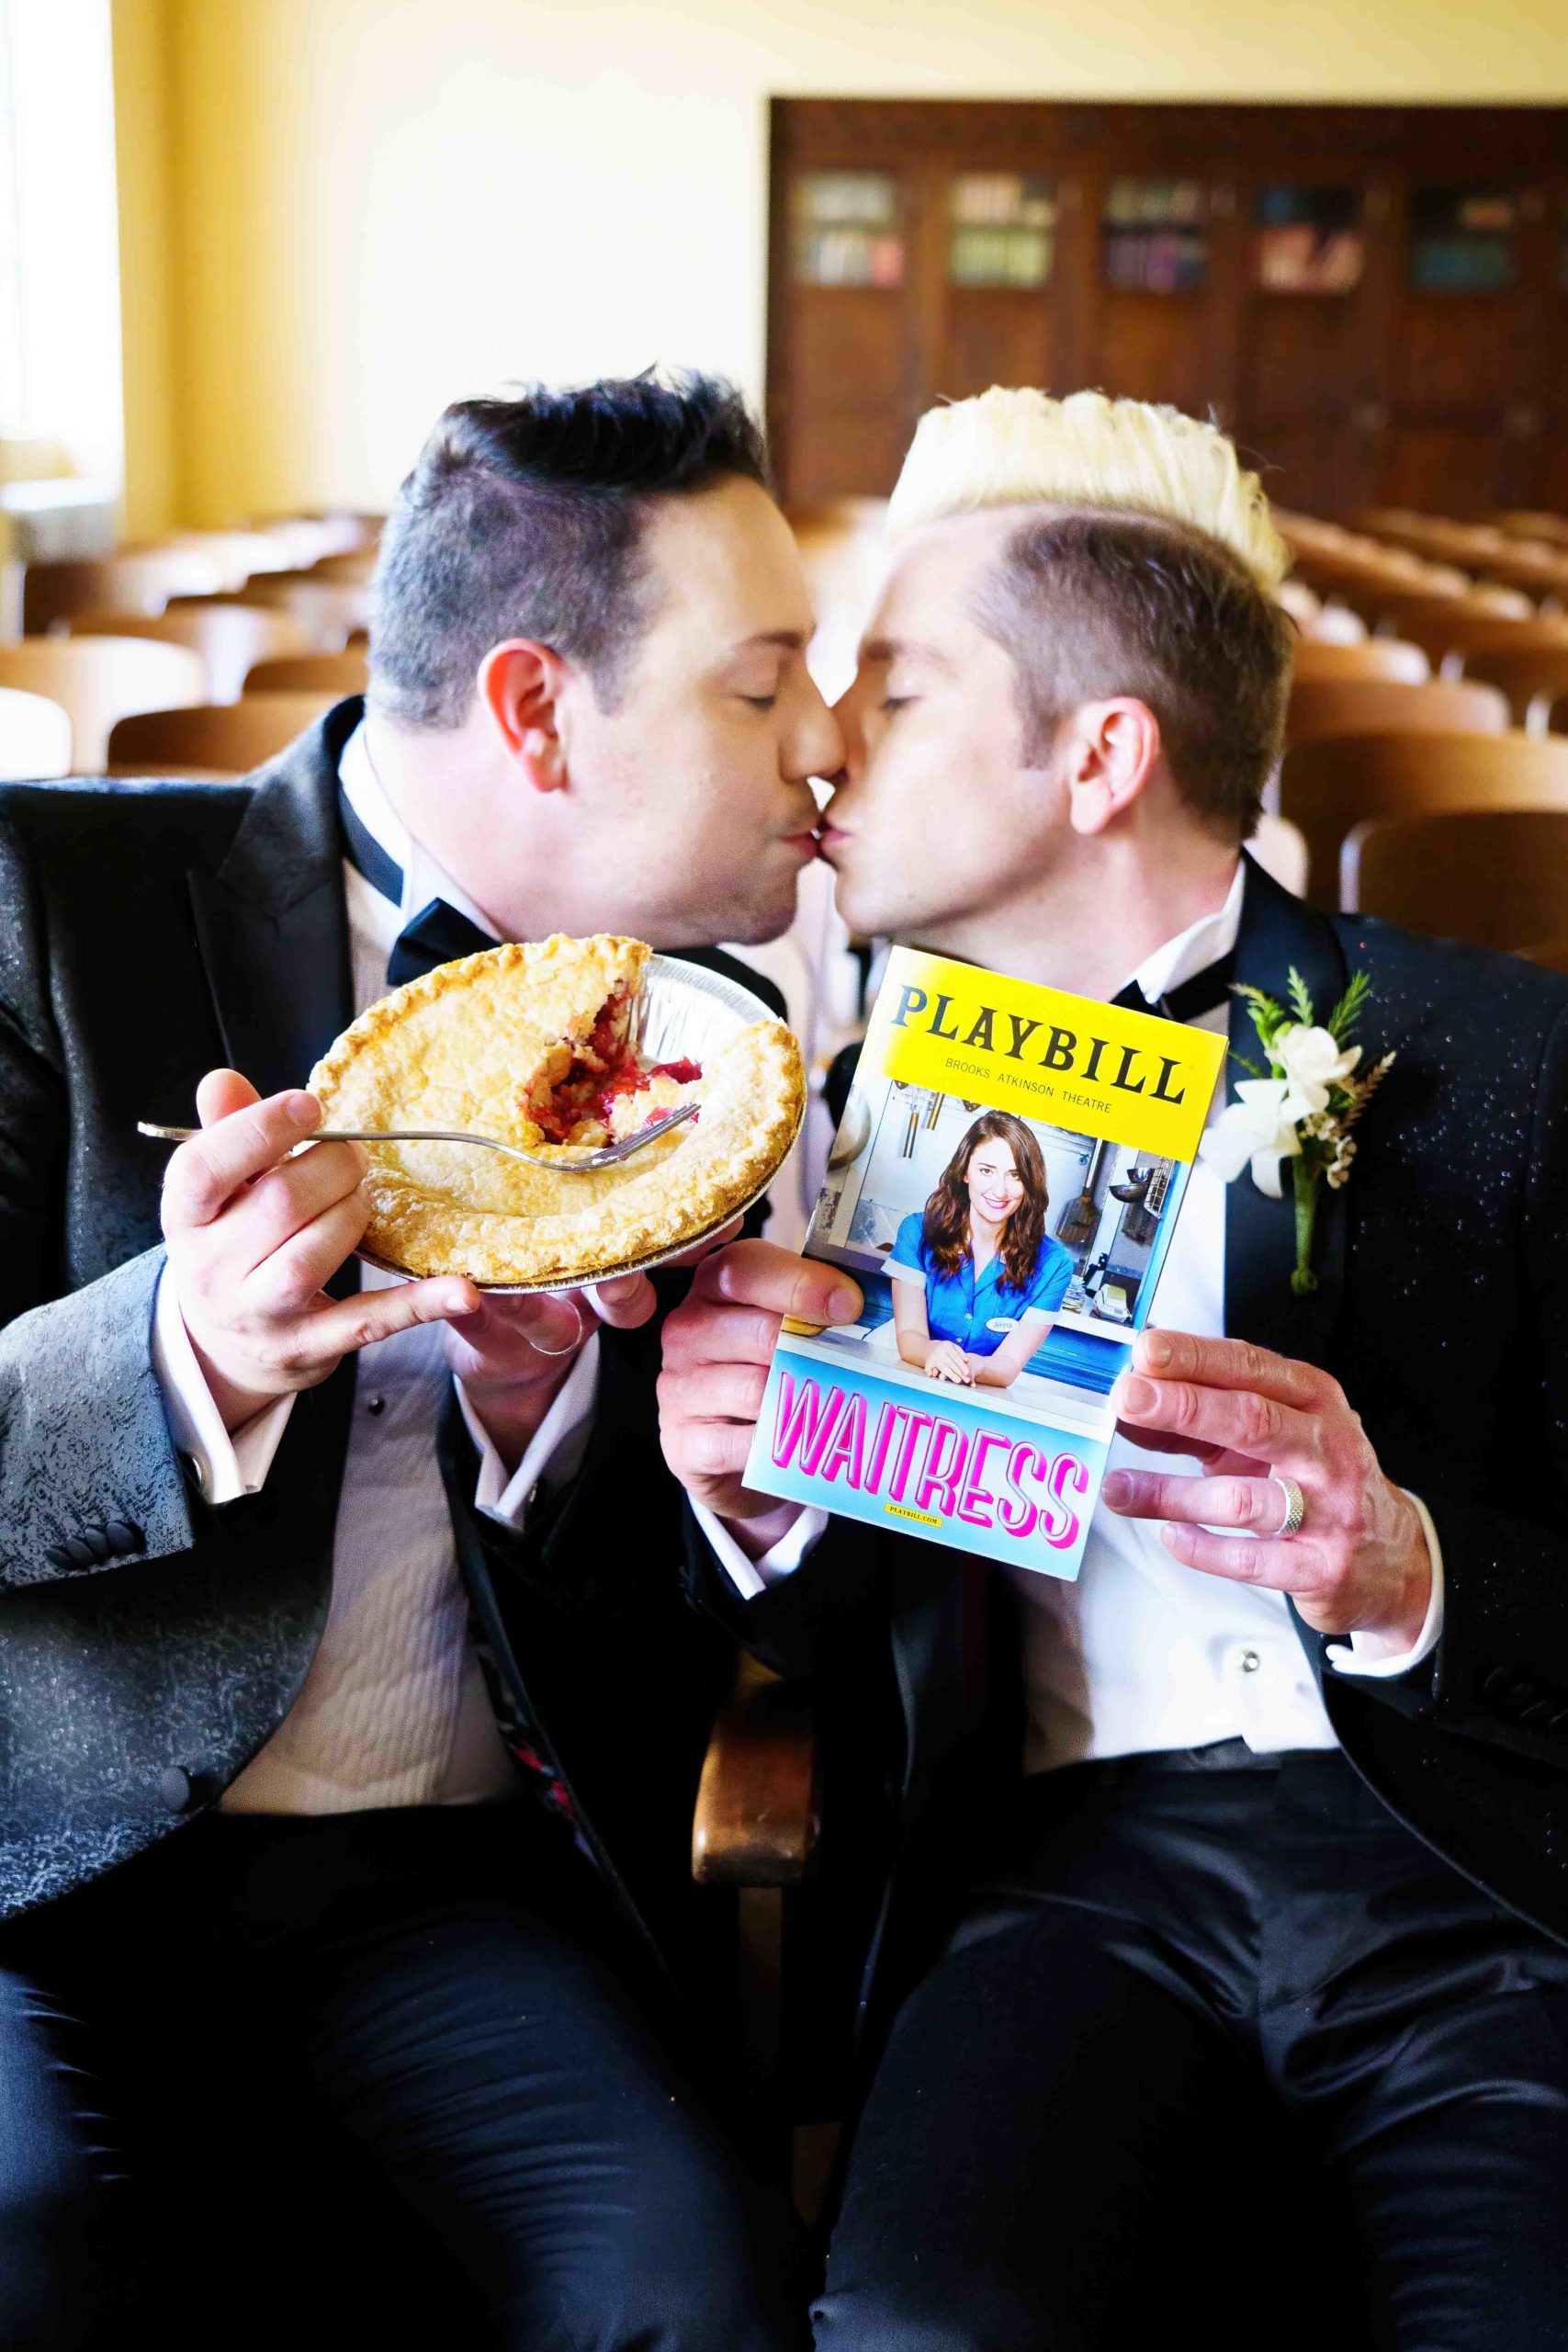 gay Hollywood wedding couple kiss while holding Waitress playbill and pie